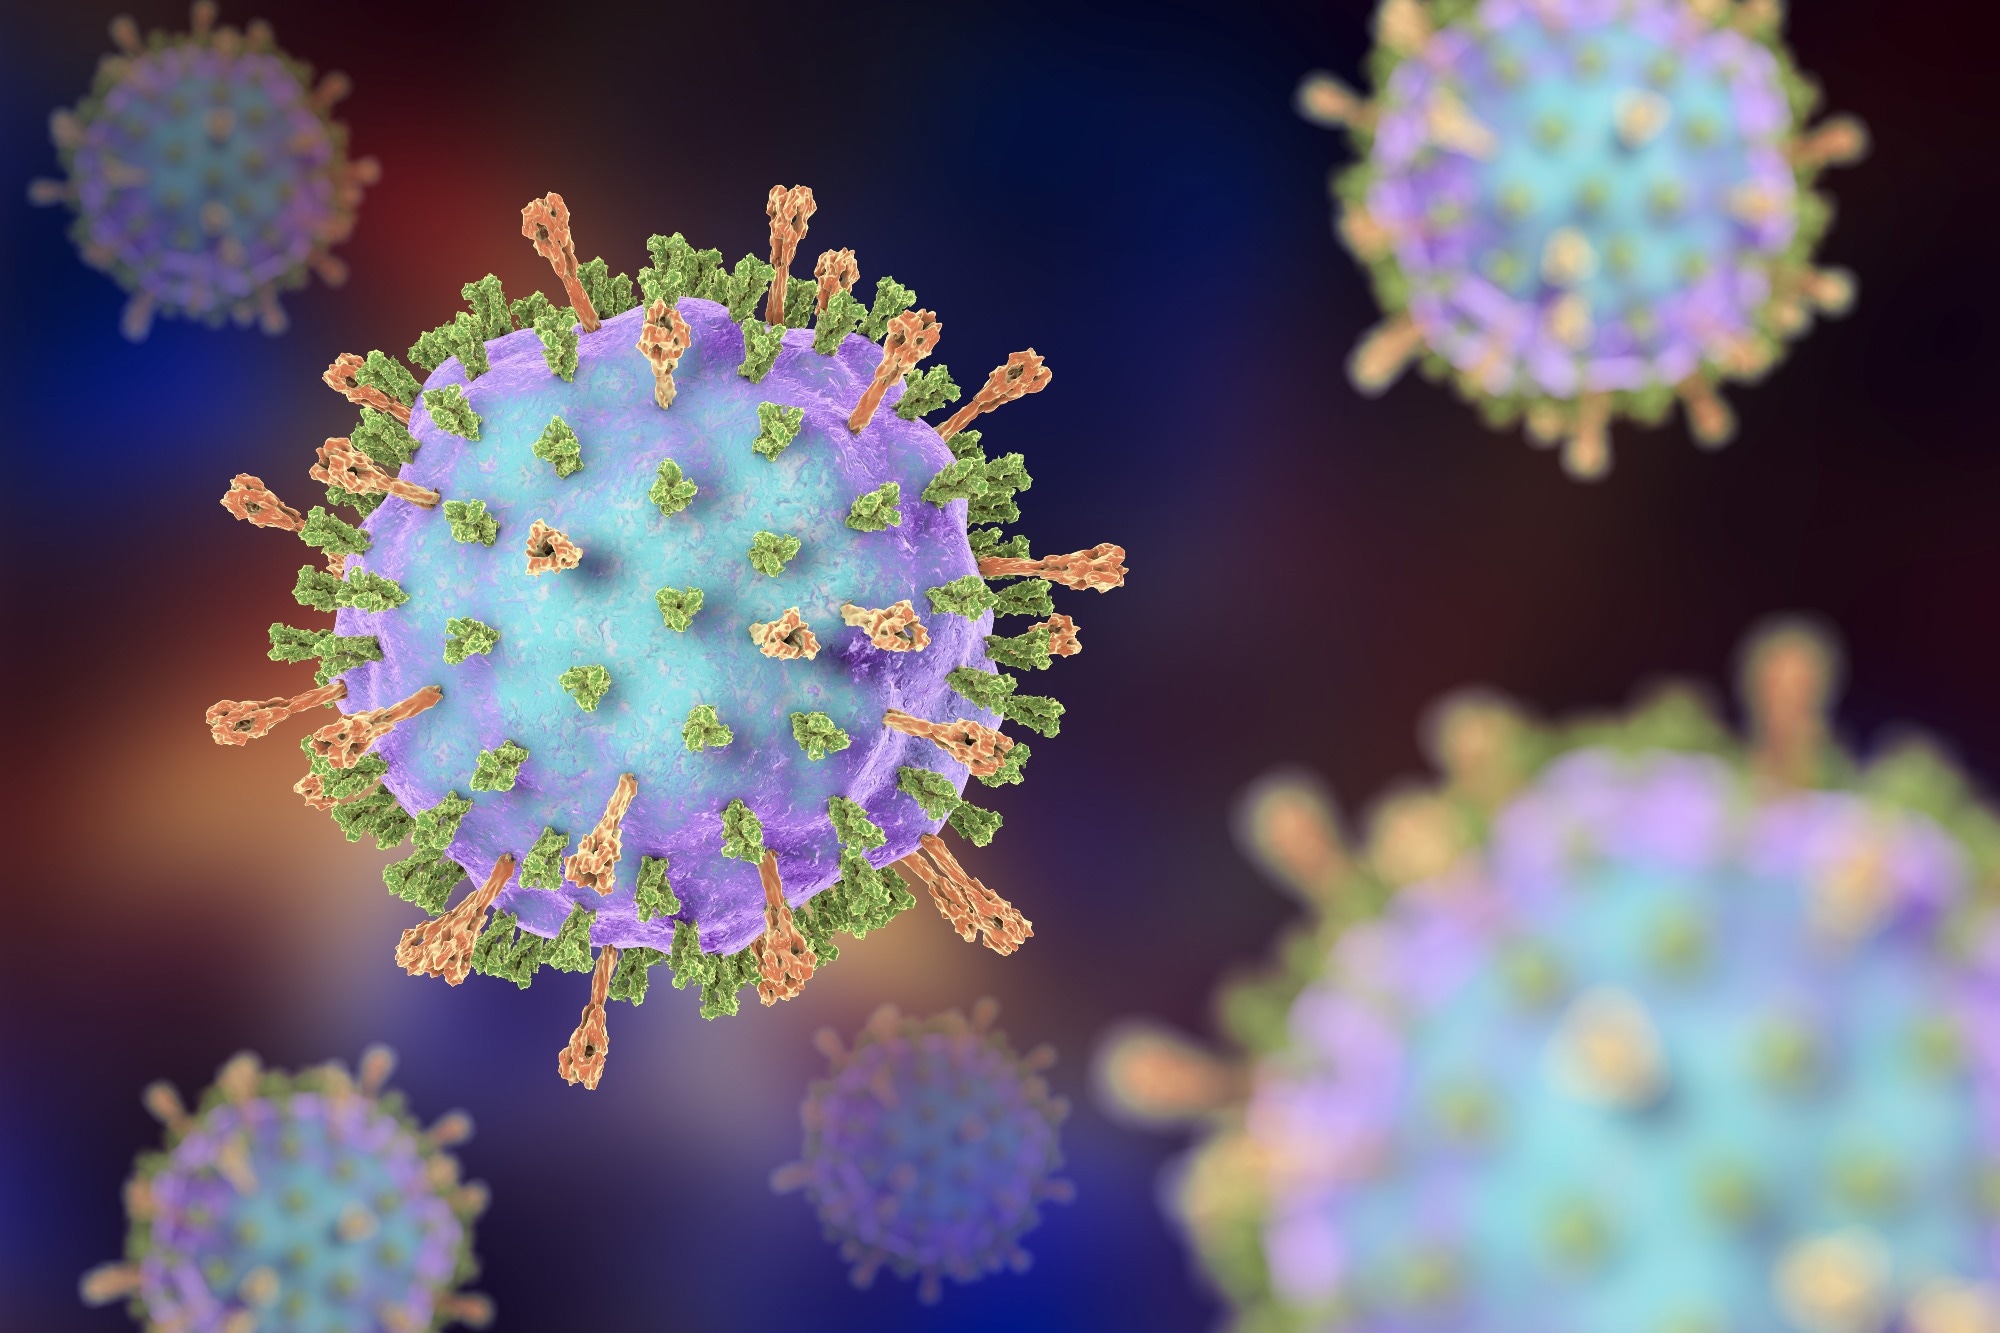 Study: Disentangling the causes of mumps reemergence in the United States. Image Credit: Kateryna Kon/Shutterstock